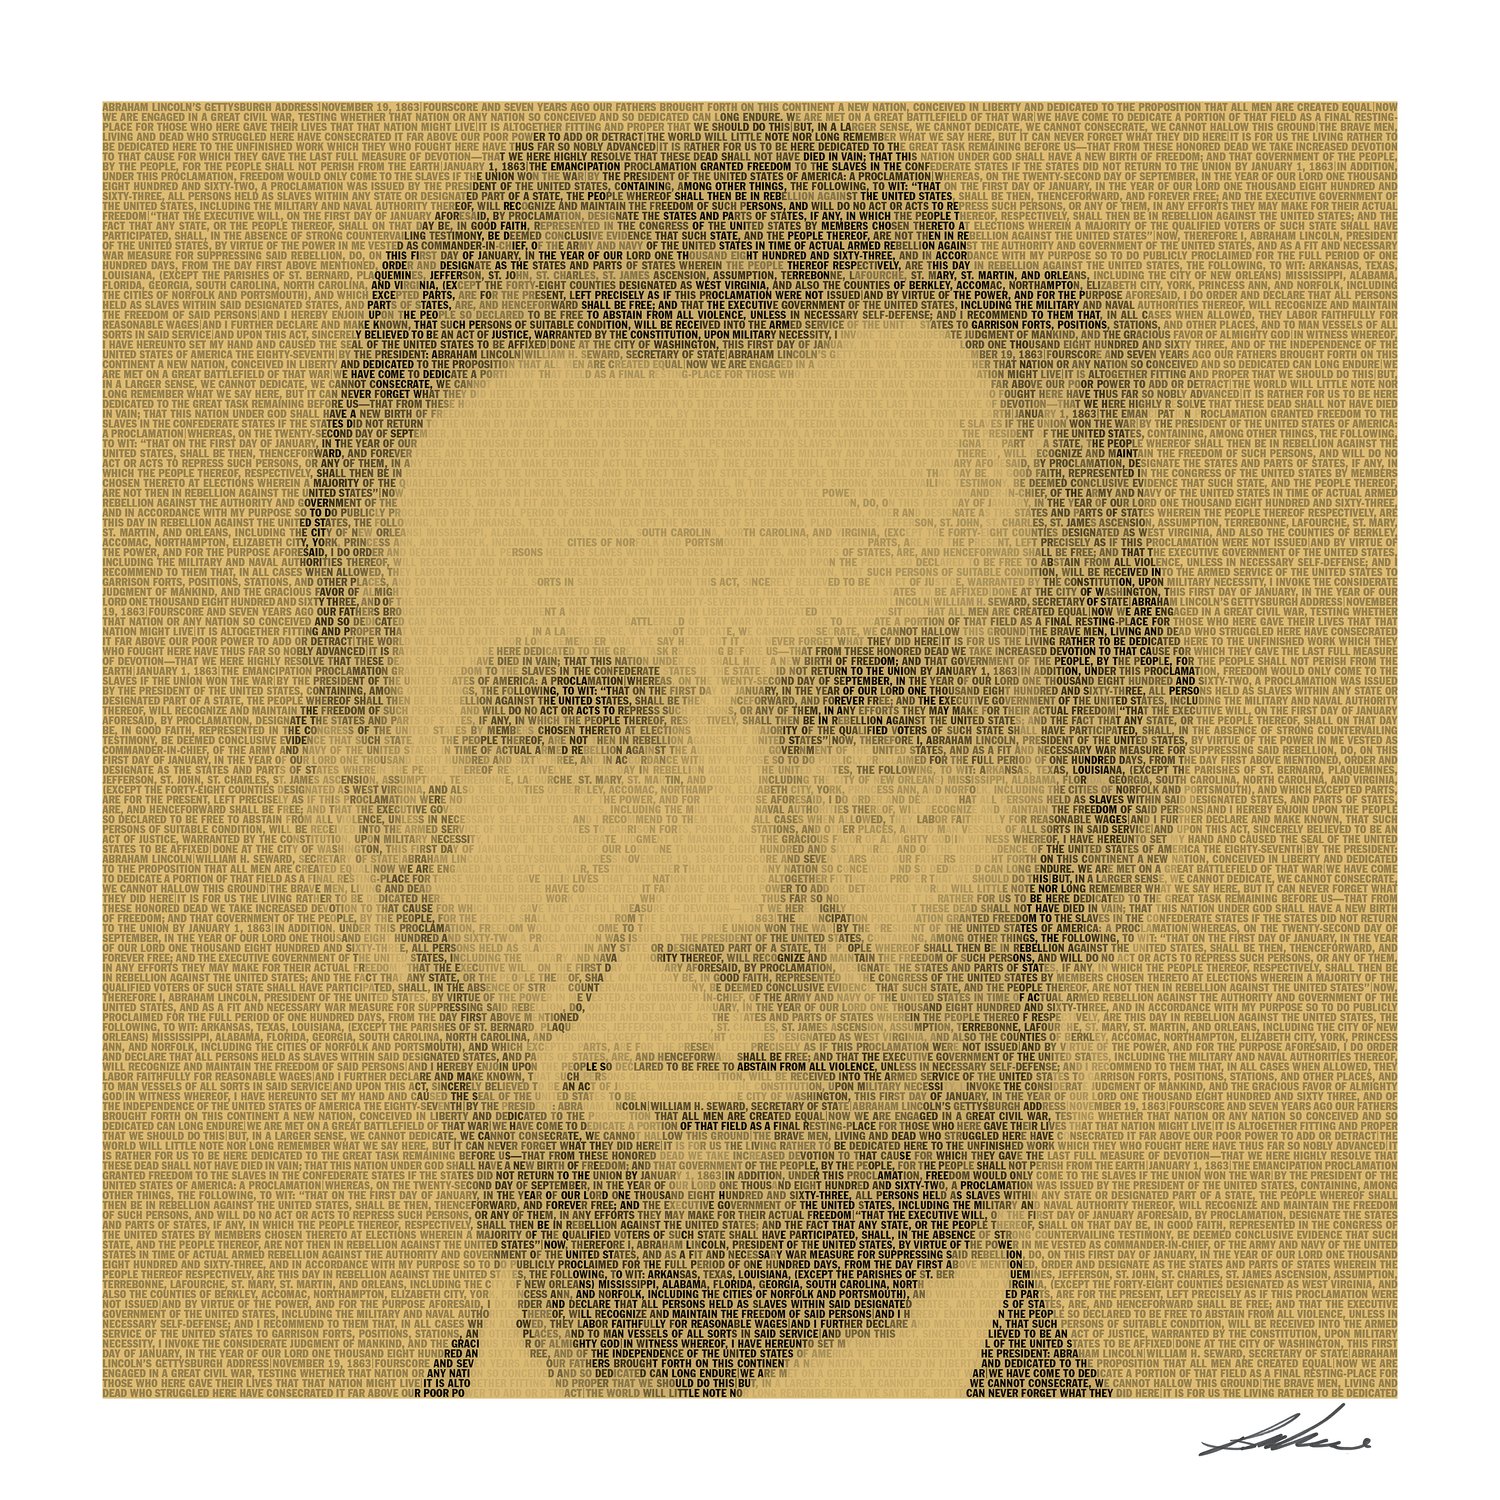 A portrait of Abraham Lincoln is part of the works by Bryce Culverhouse.